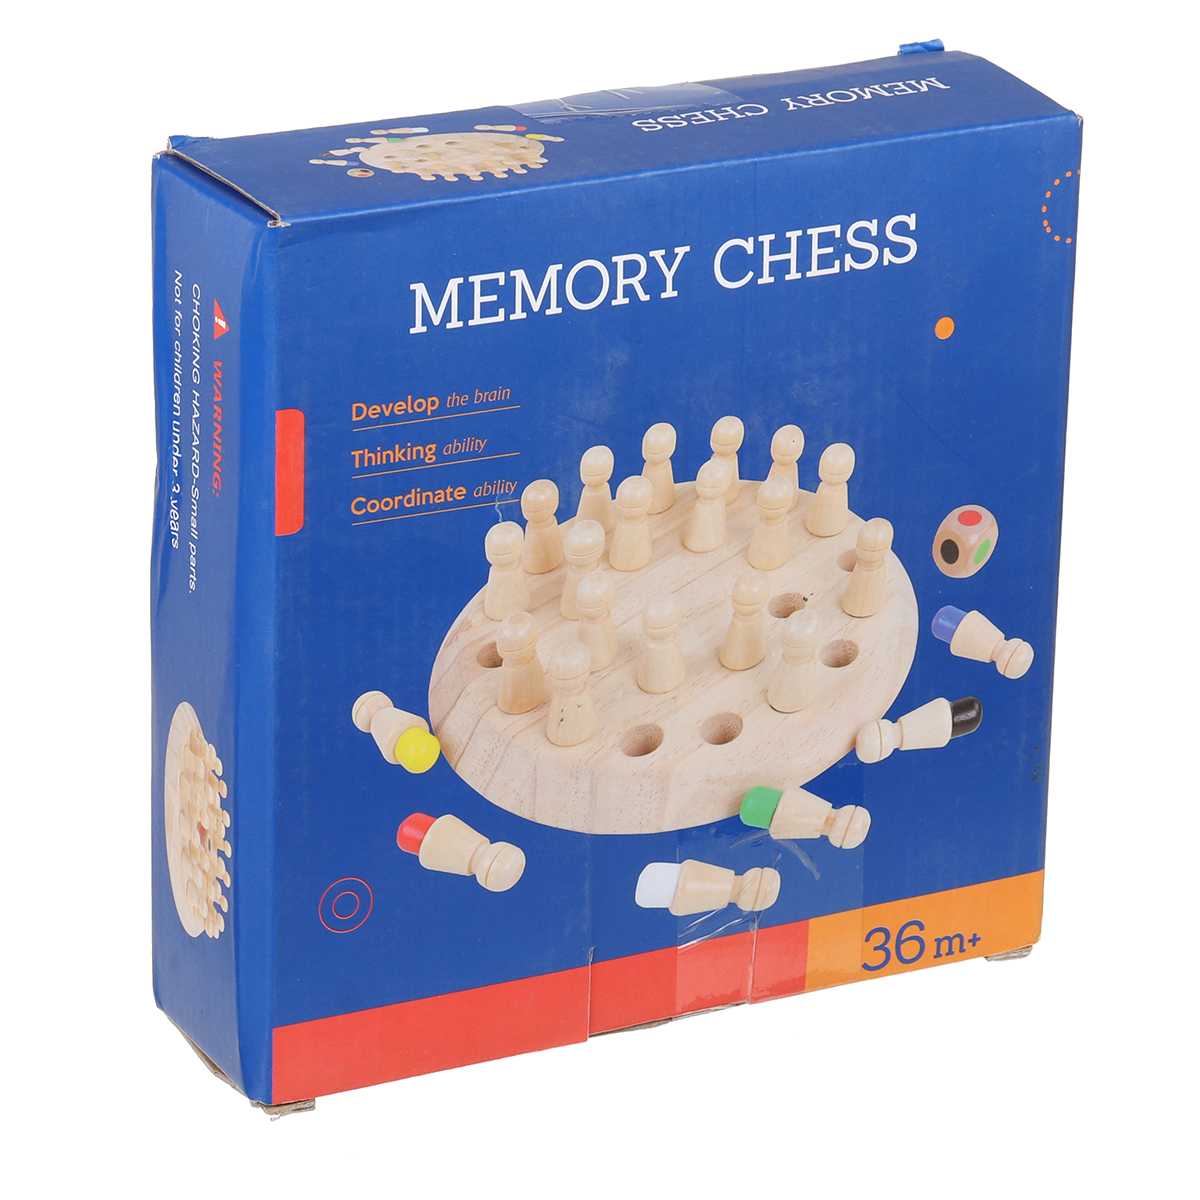 Montessori-Wooden-Colorful-Memory-Chess-Game-Clip-Beads-3D-Puzzle-Learning-Educational-Toys-for-Chil-1723192-11